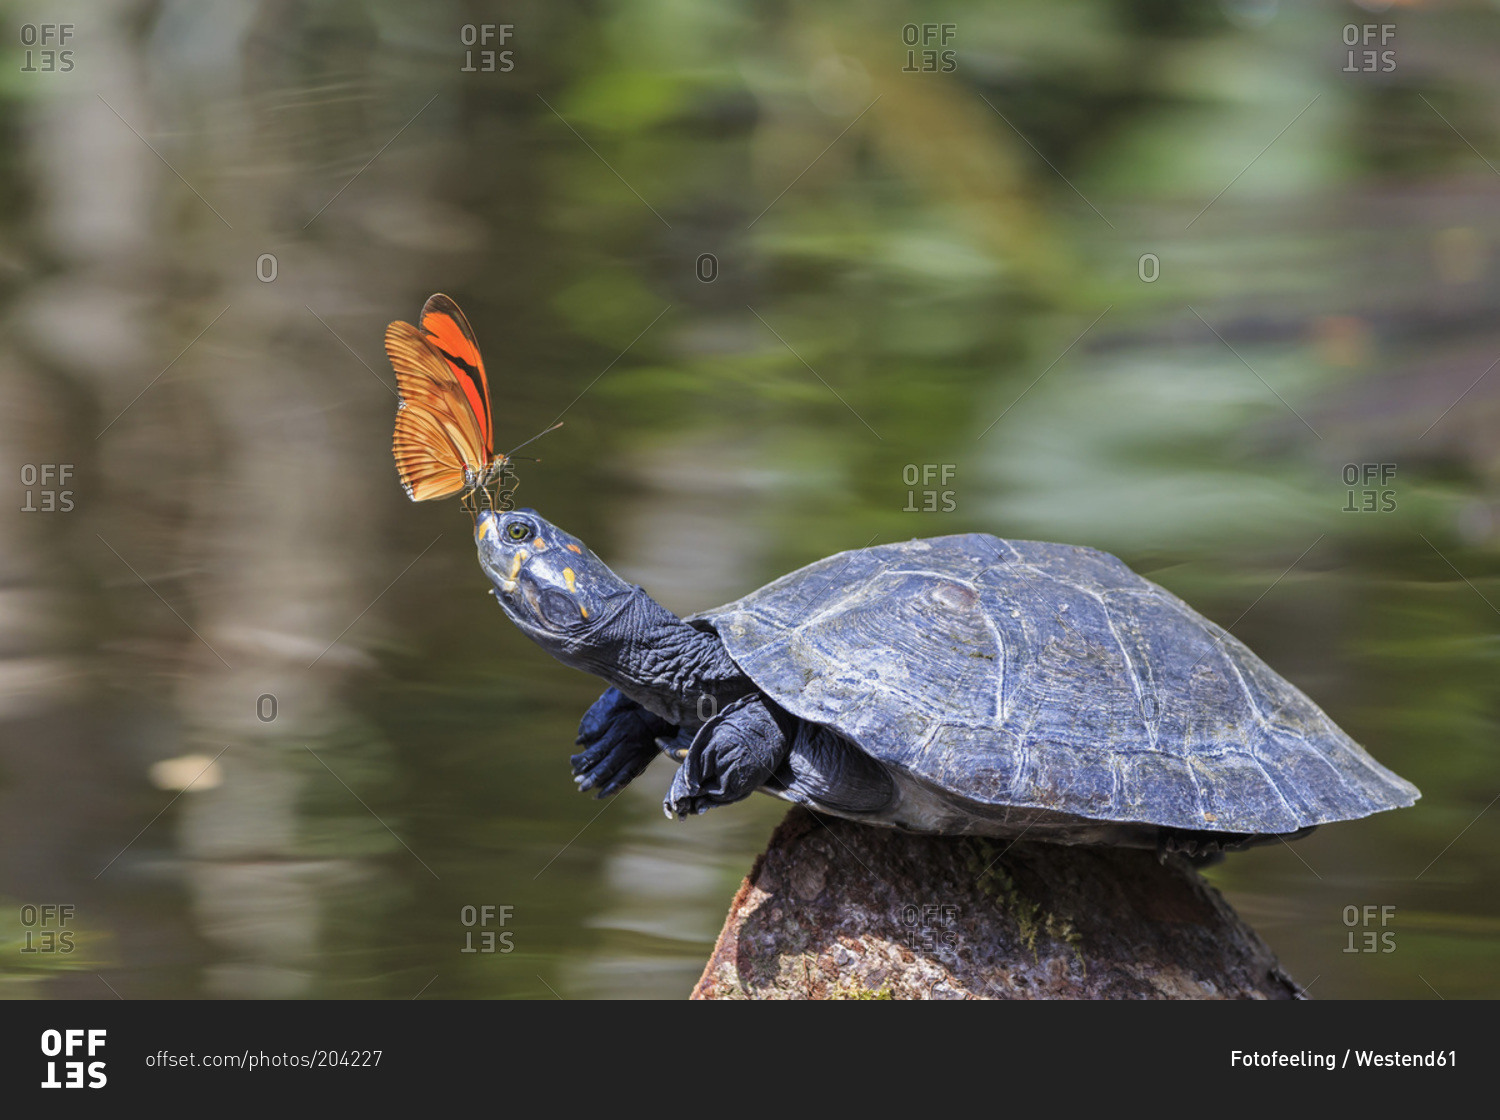 Julia butterfly on the nose of a yellow-spotted river turtle, Amazon River, Ecuador